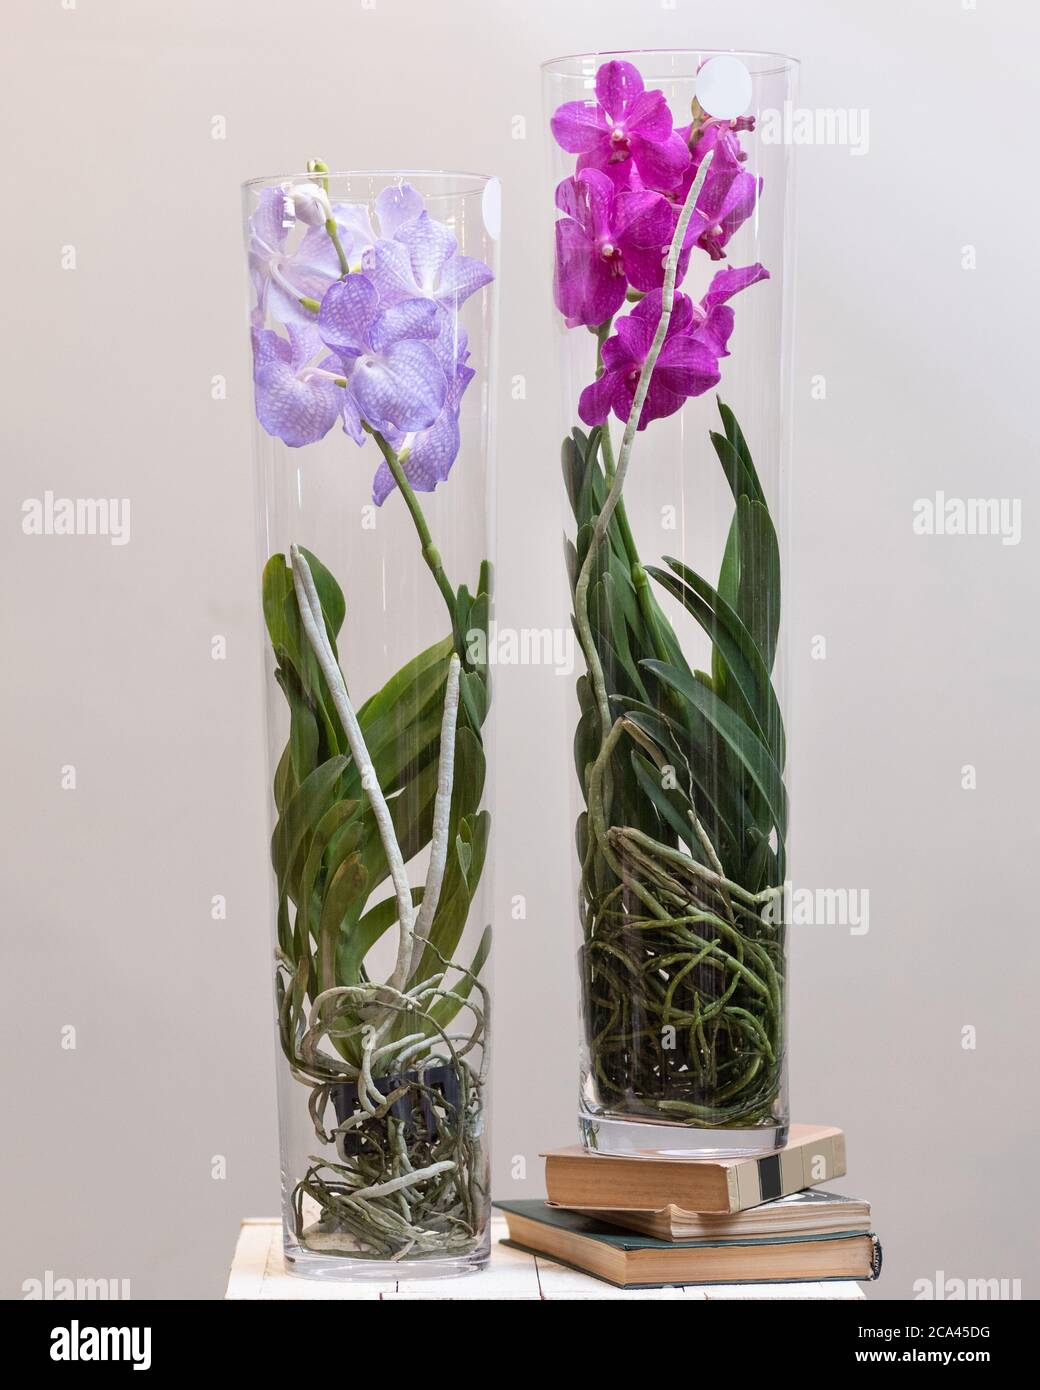 Two colorful Singapore orchid, Vanda orchid in the glass pot Stock Photo